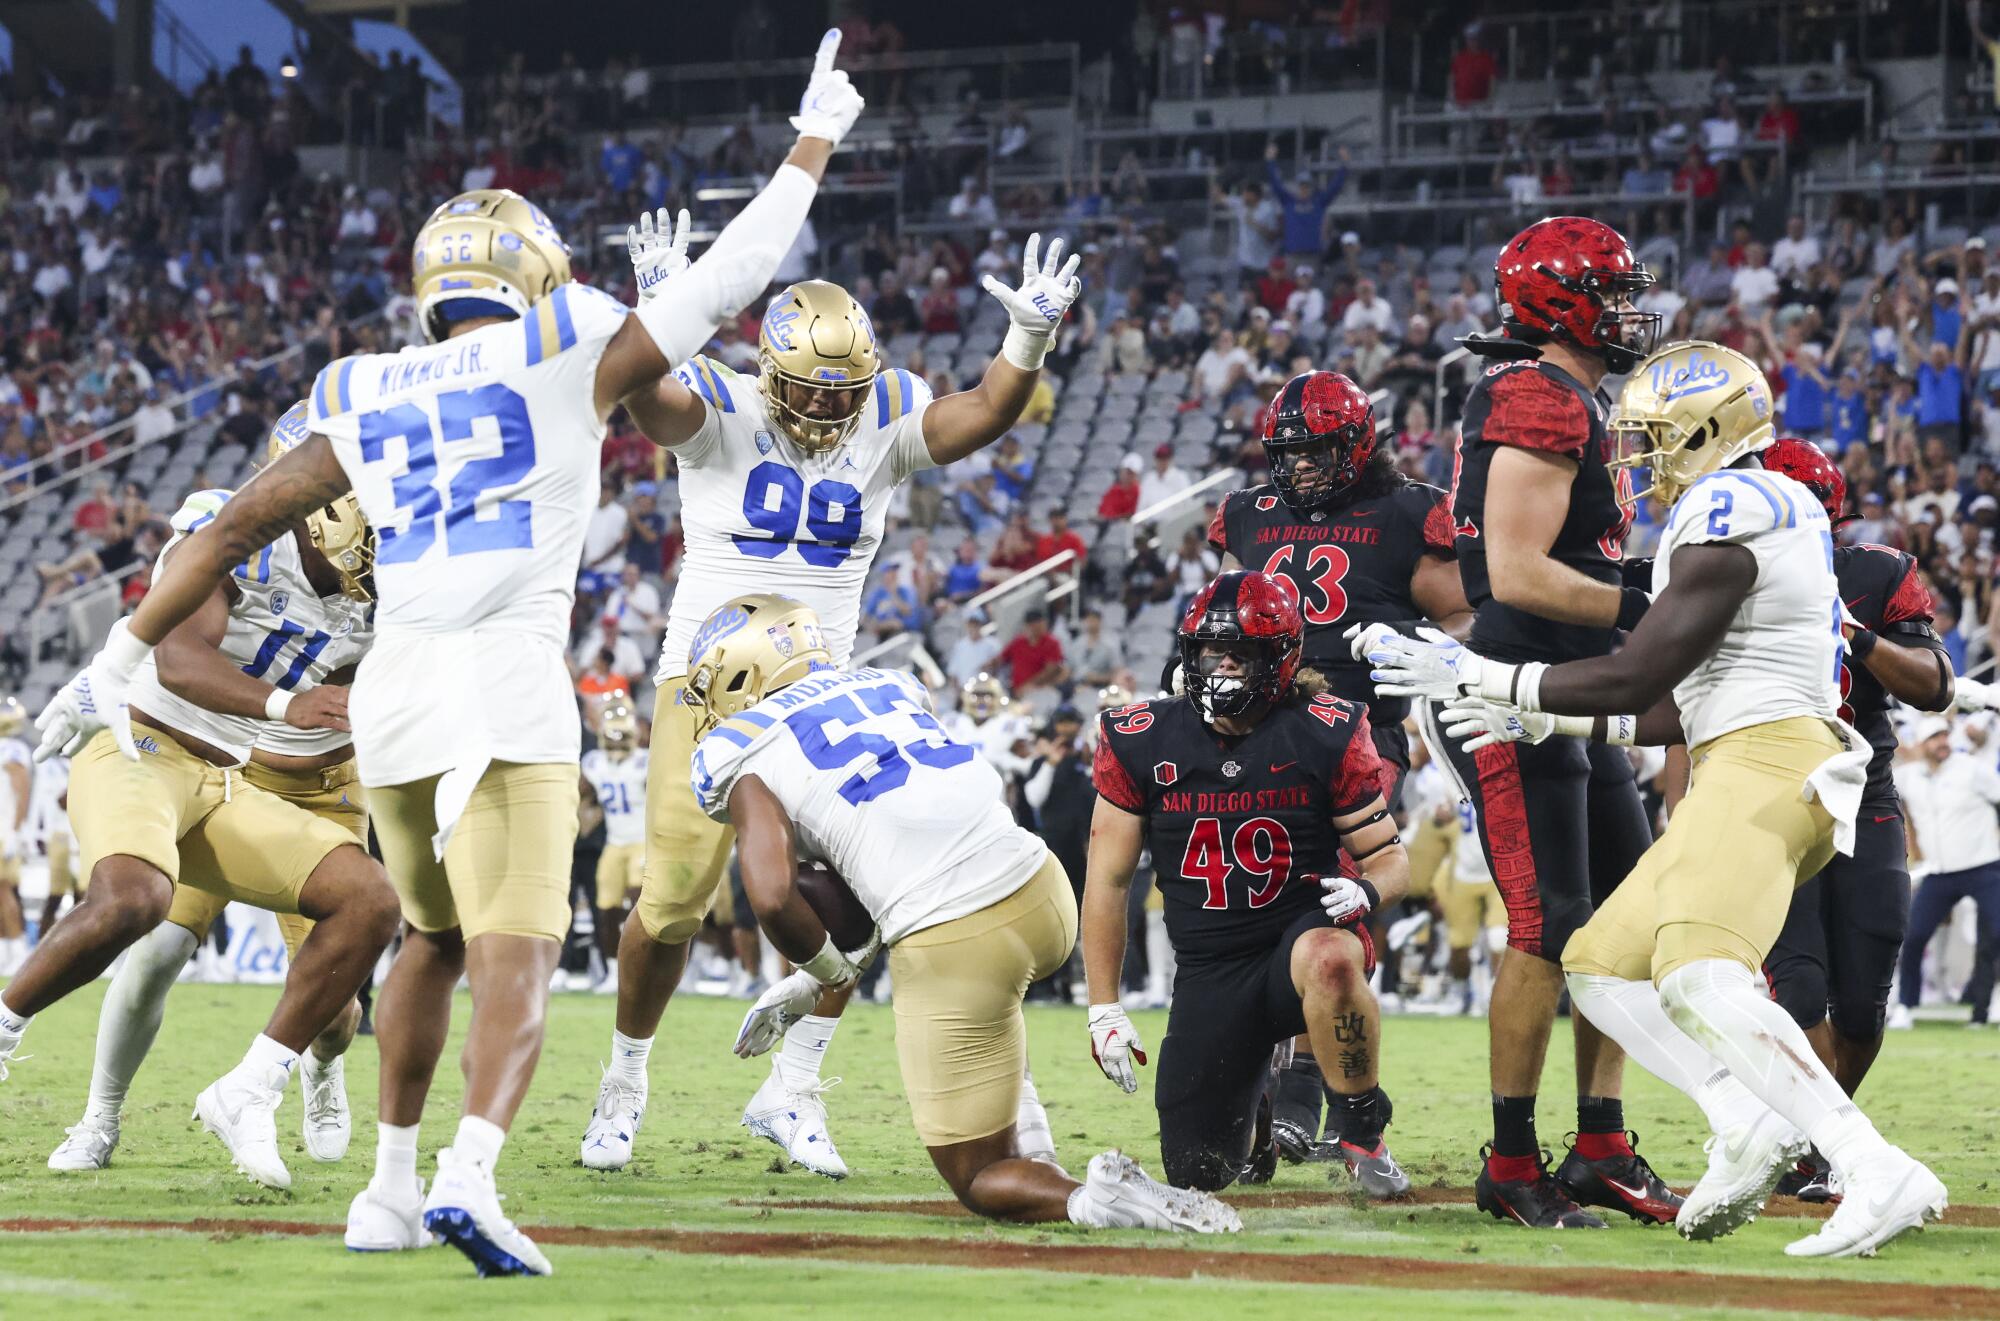 UCLA players celebrate an interception against San Diego State.